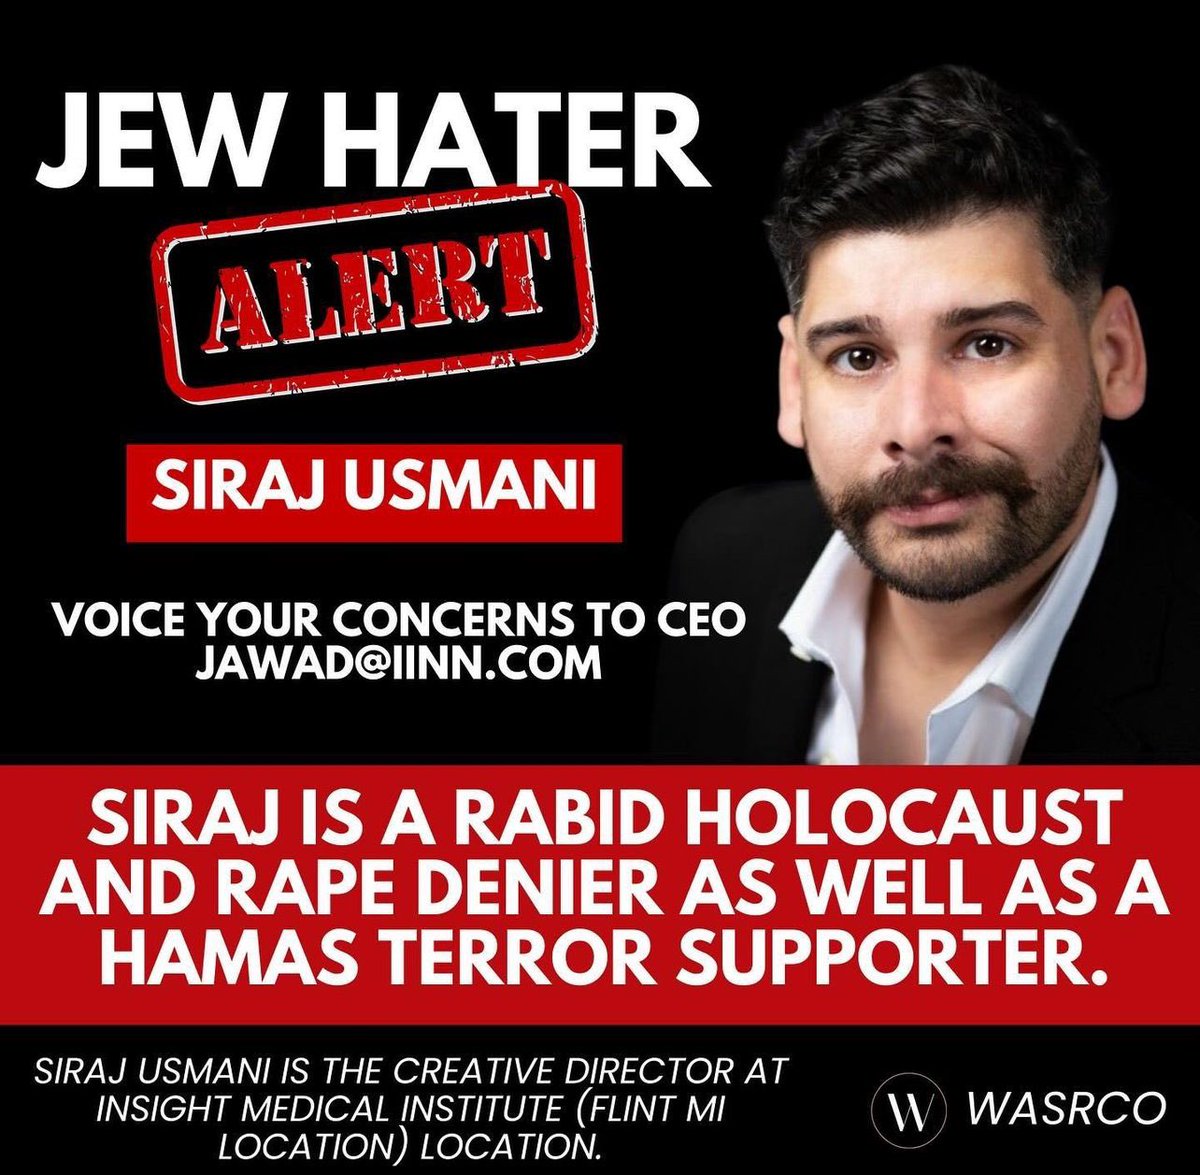 Siraj Usmani is a rabid Holocaust and rape denier as well as a Hamas terror supporter.

Siraj Usmani is the creative director at Insight Medical Institute (Flint MI location) location. 

Voice your concern to Insight’s CEO: Jawad@iinn.com

#antisemetism #jewhate #jewhater…